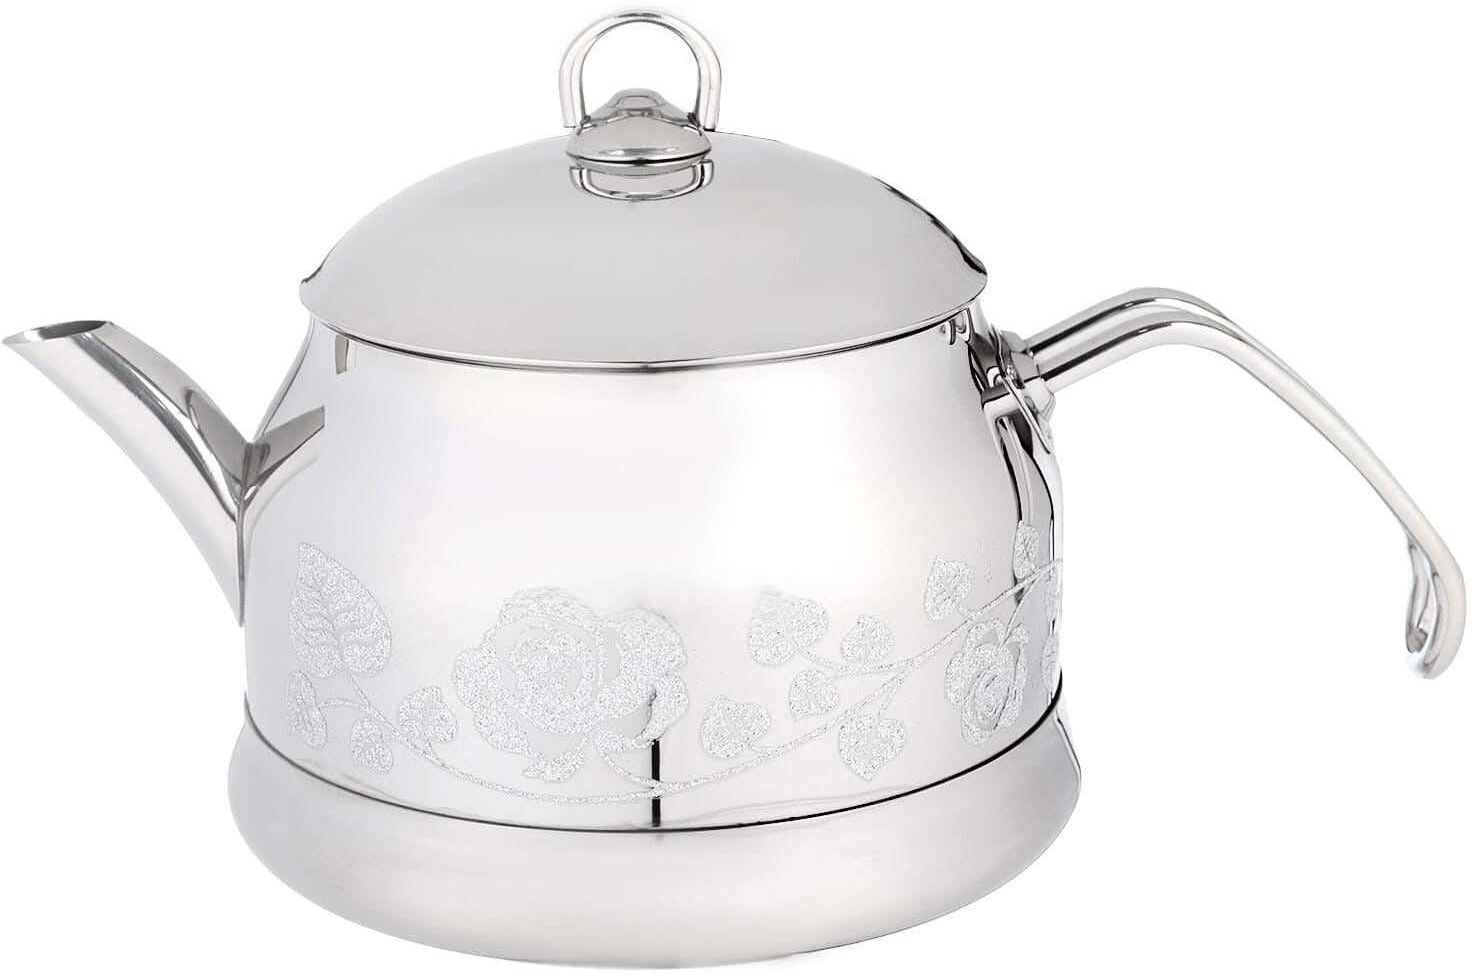 Get EL ANDALOS Stainless Steel Tea Pot, 2 Liter - Silver with best offers | Raneen.com